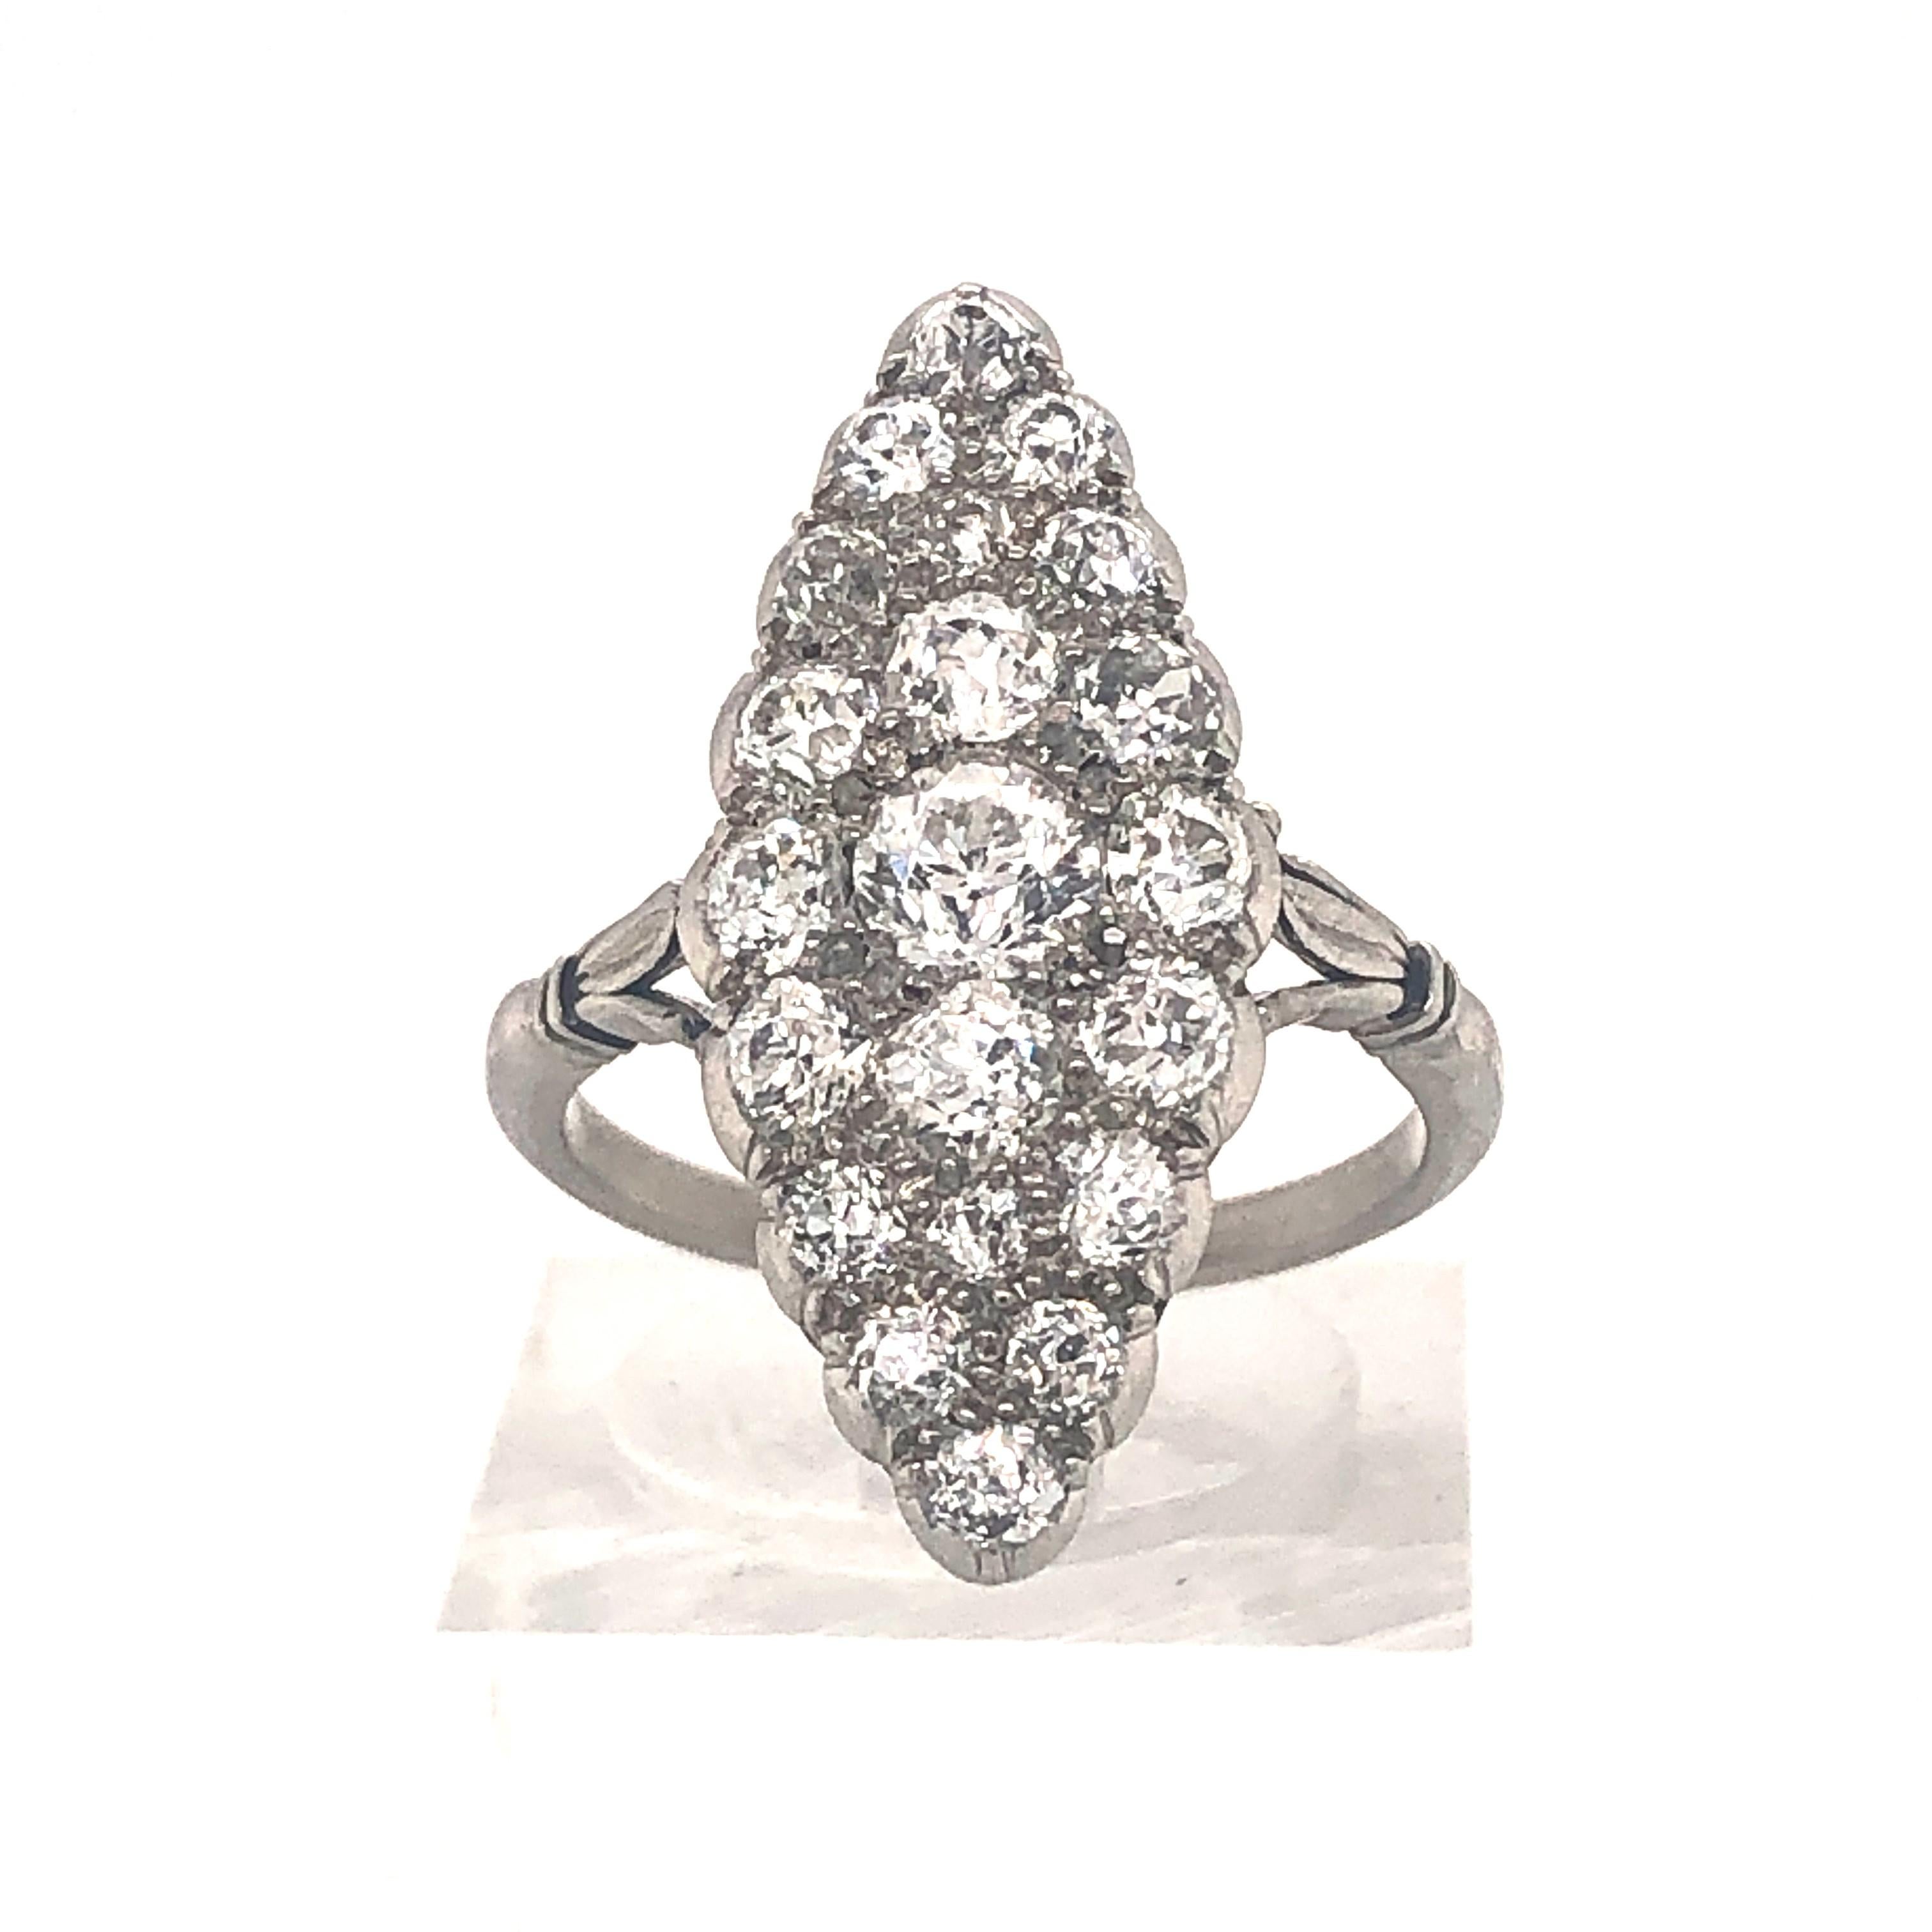 An Edwardian diamond cluster ring, marquise shaped design, with twenty-one, pavé set, old cut diamonds, mounted in platinum with carved detail to the shoulders and a carved gallery, with an estimated total diamond weight of 1.50ct, estimated colour